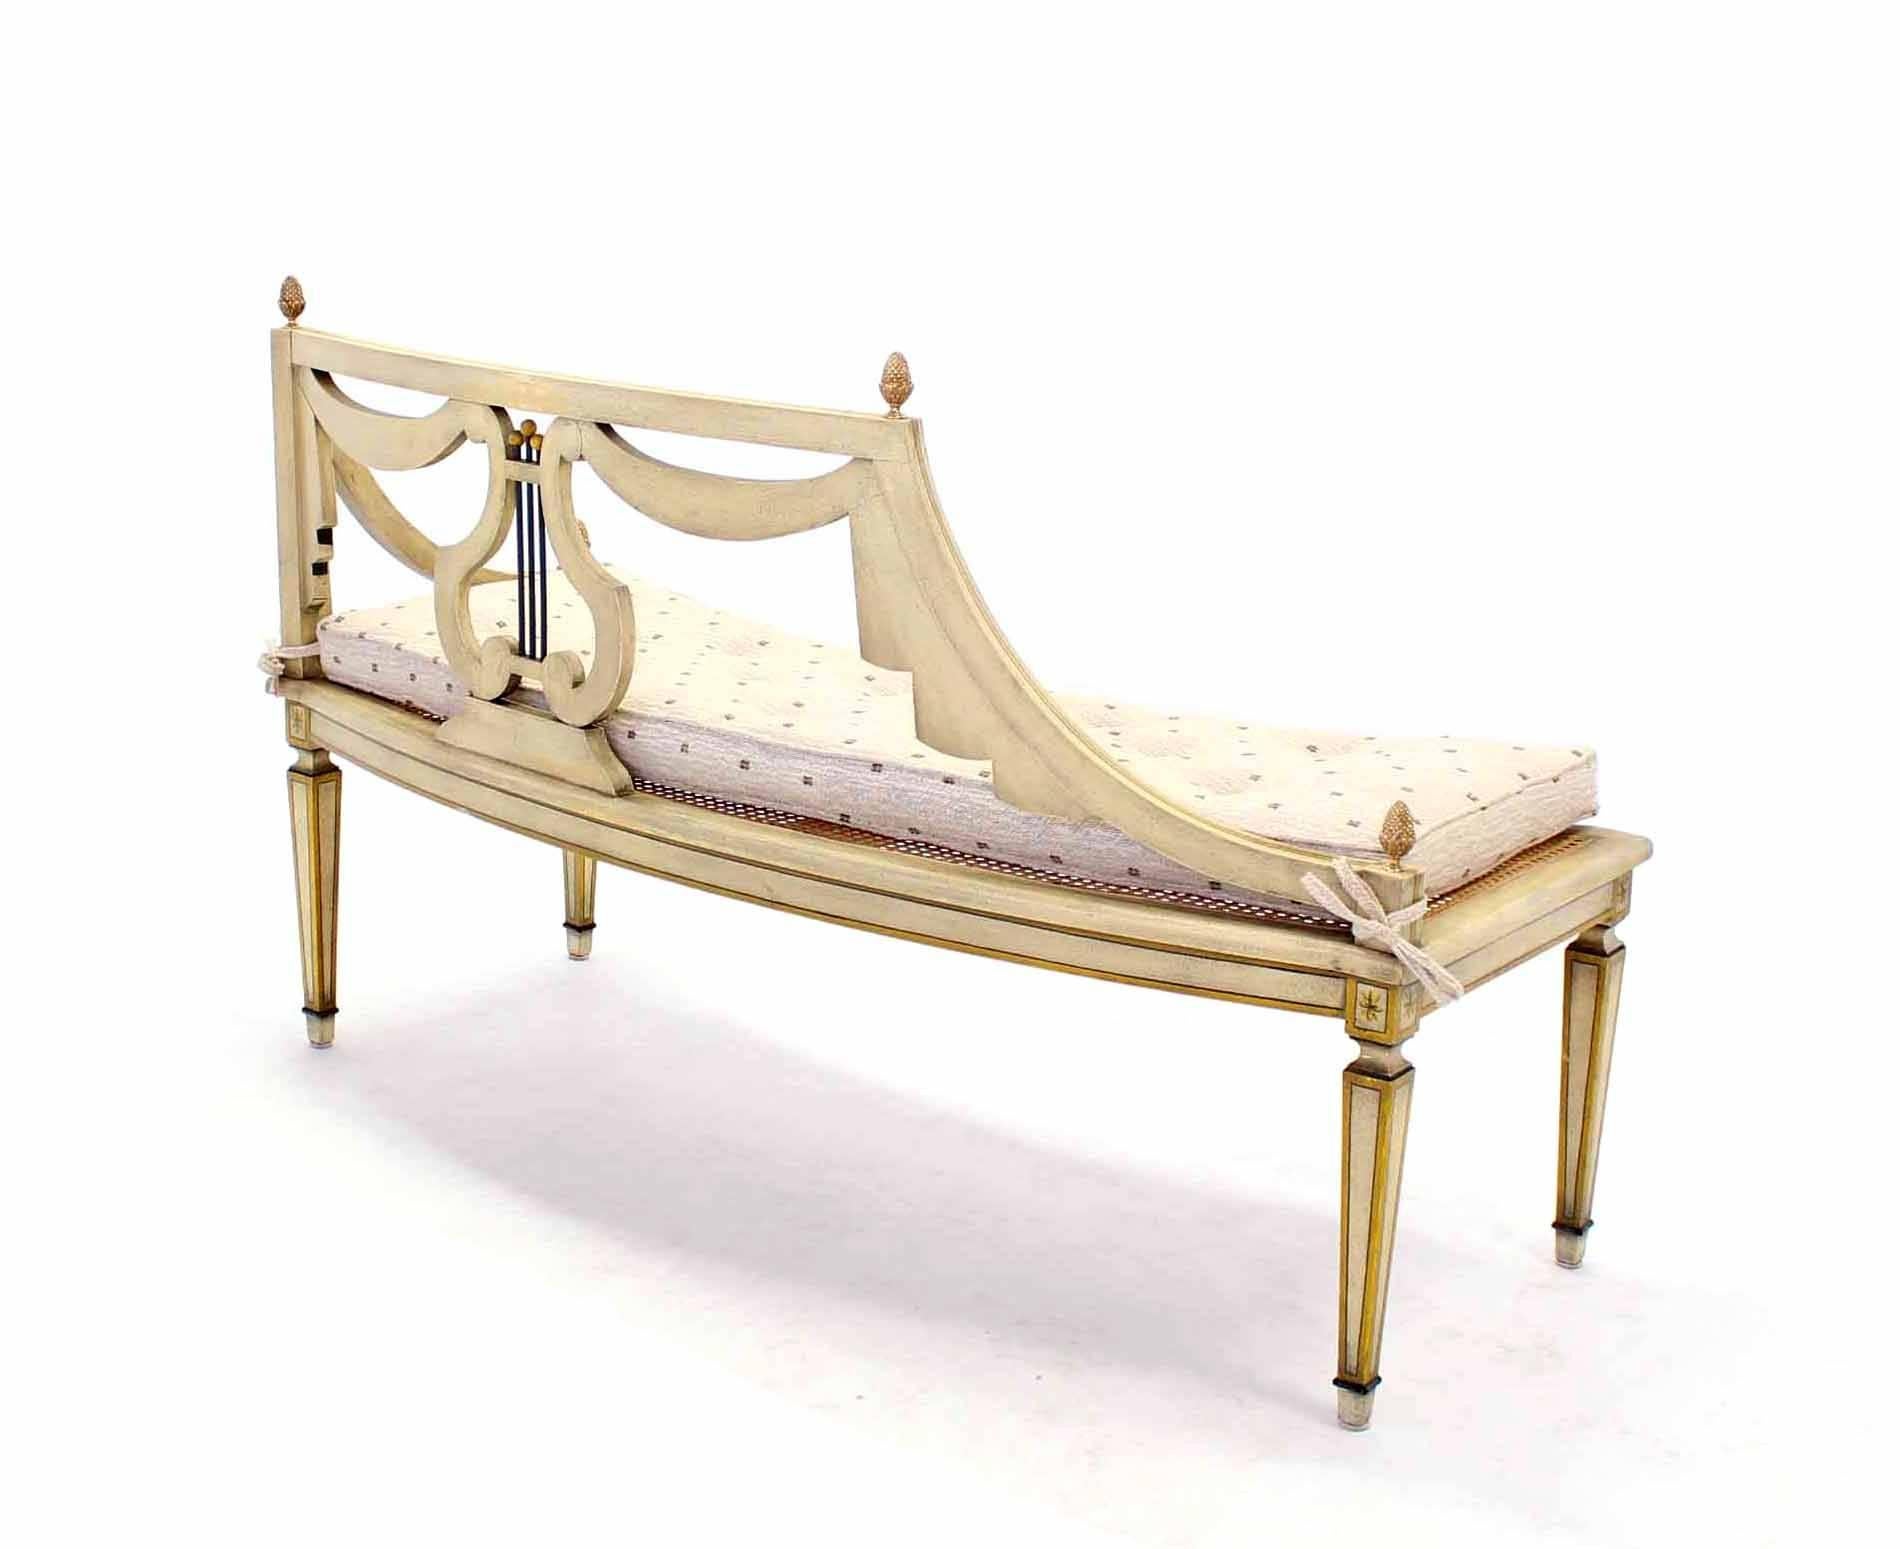 20th Century French Provincial Style Curved Bench Recamier New Upholstery For Sale